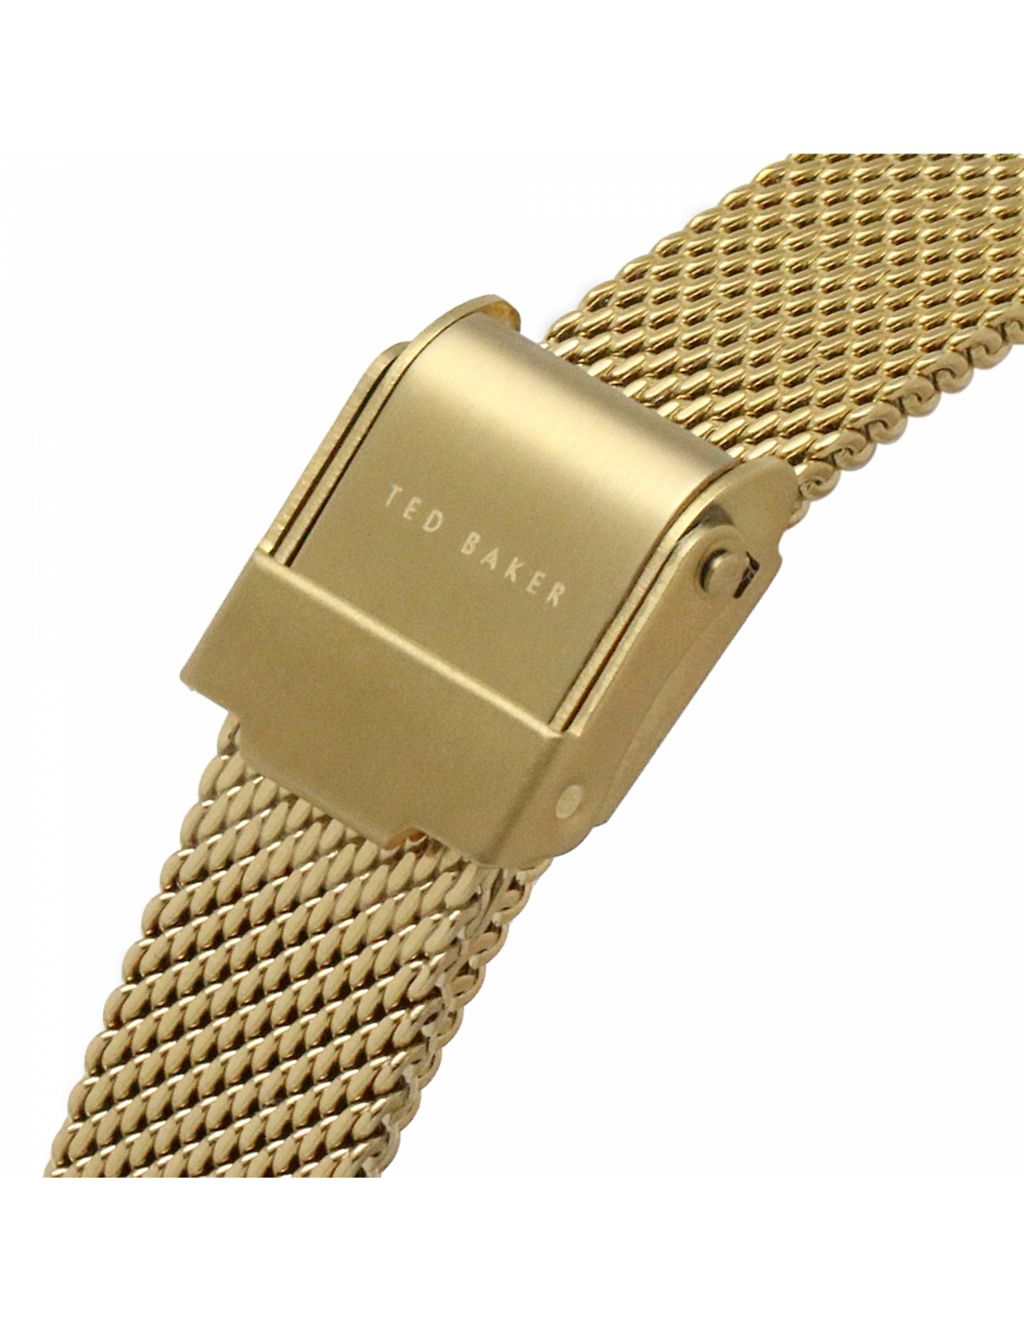 Ted Baker Ammy Hearts Gold Watch image 5